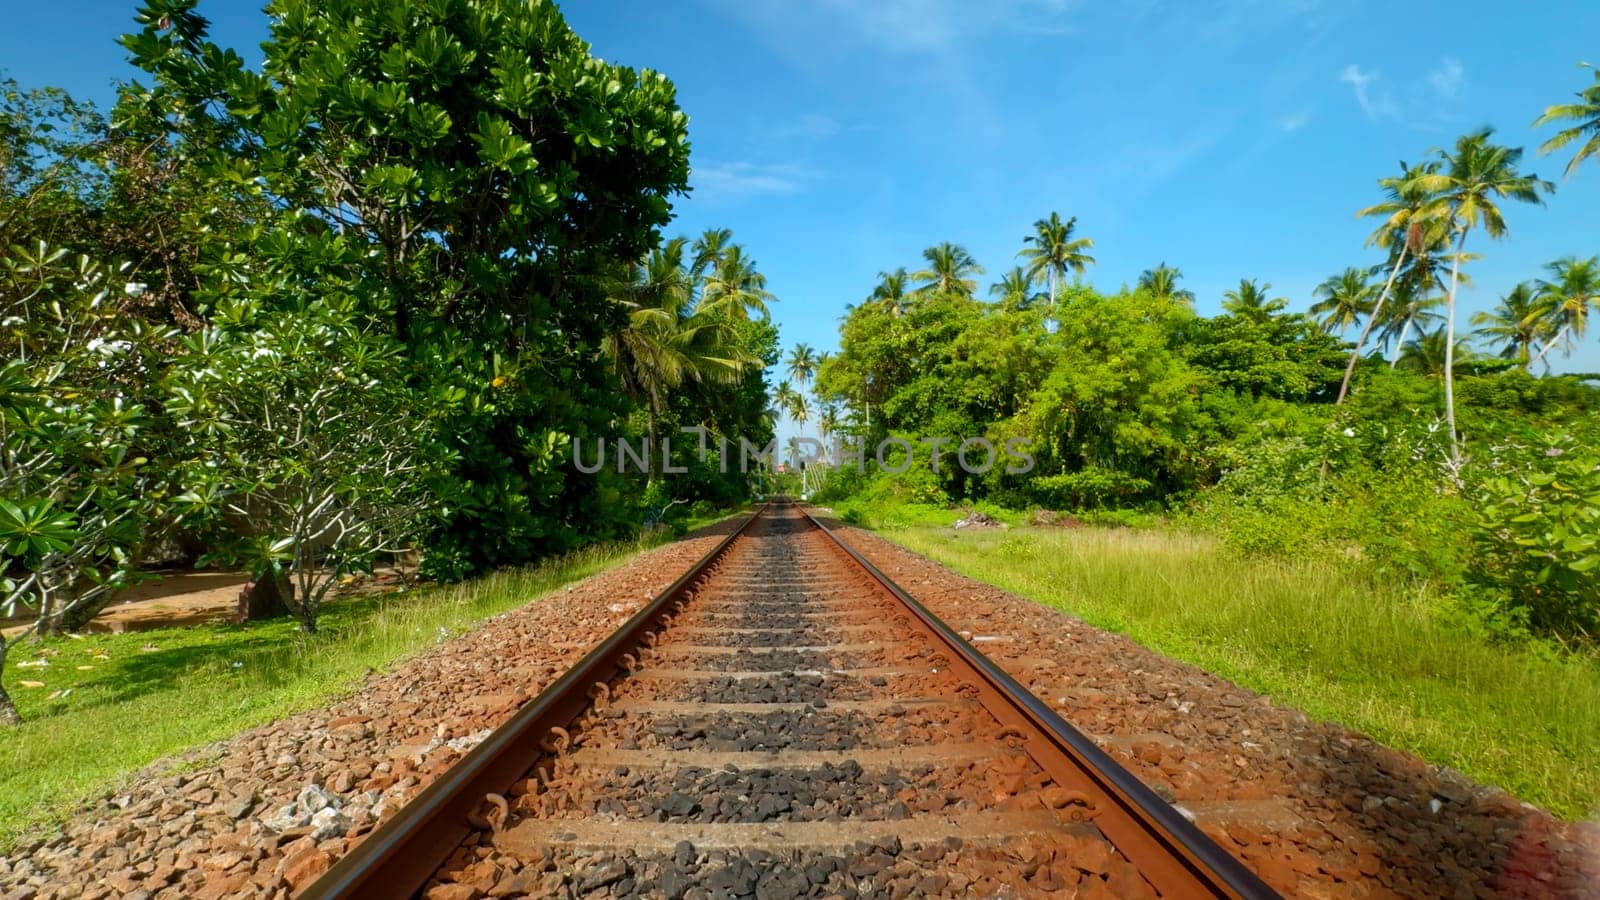 Walking along abandoned railway track. Action. Lush green tropical vegetation on a summer day